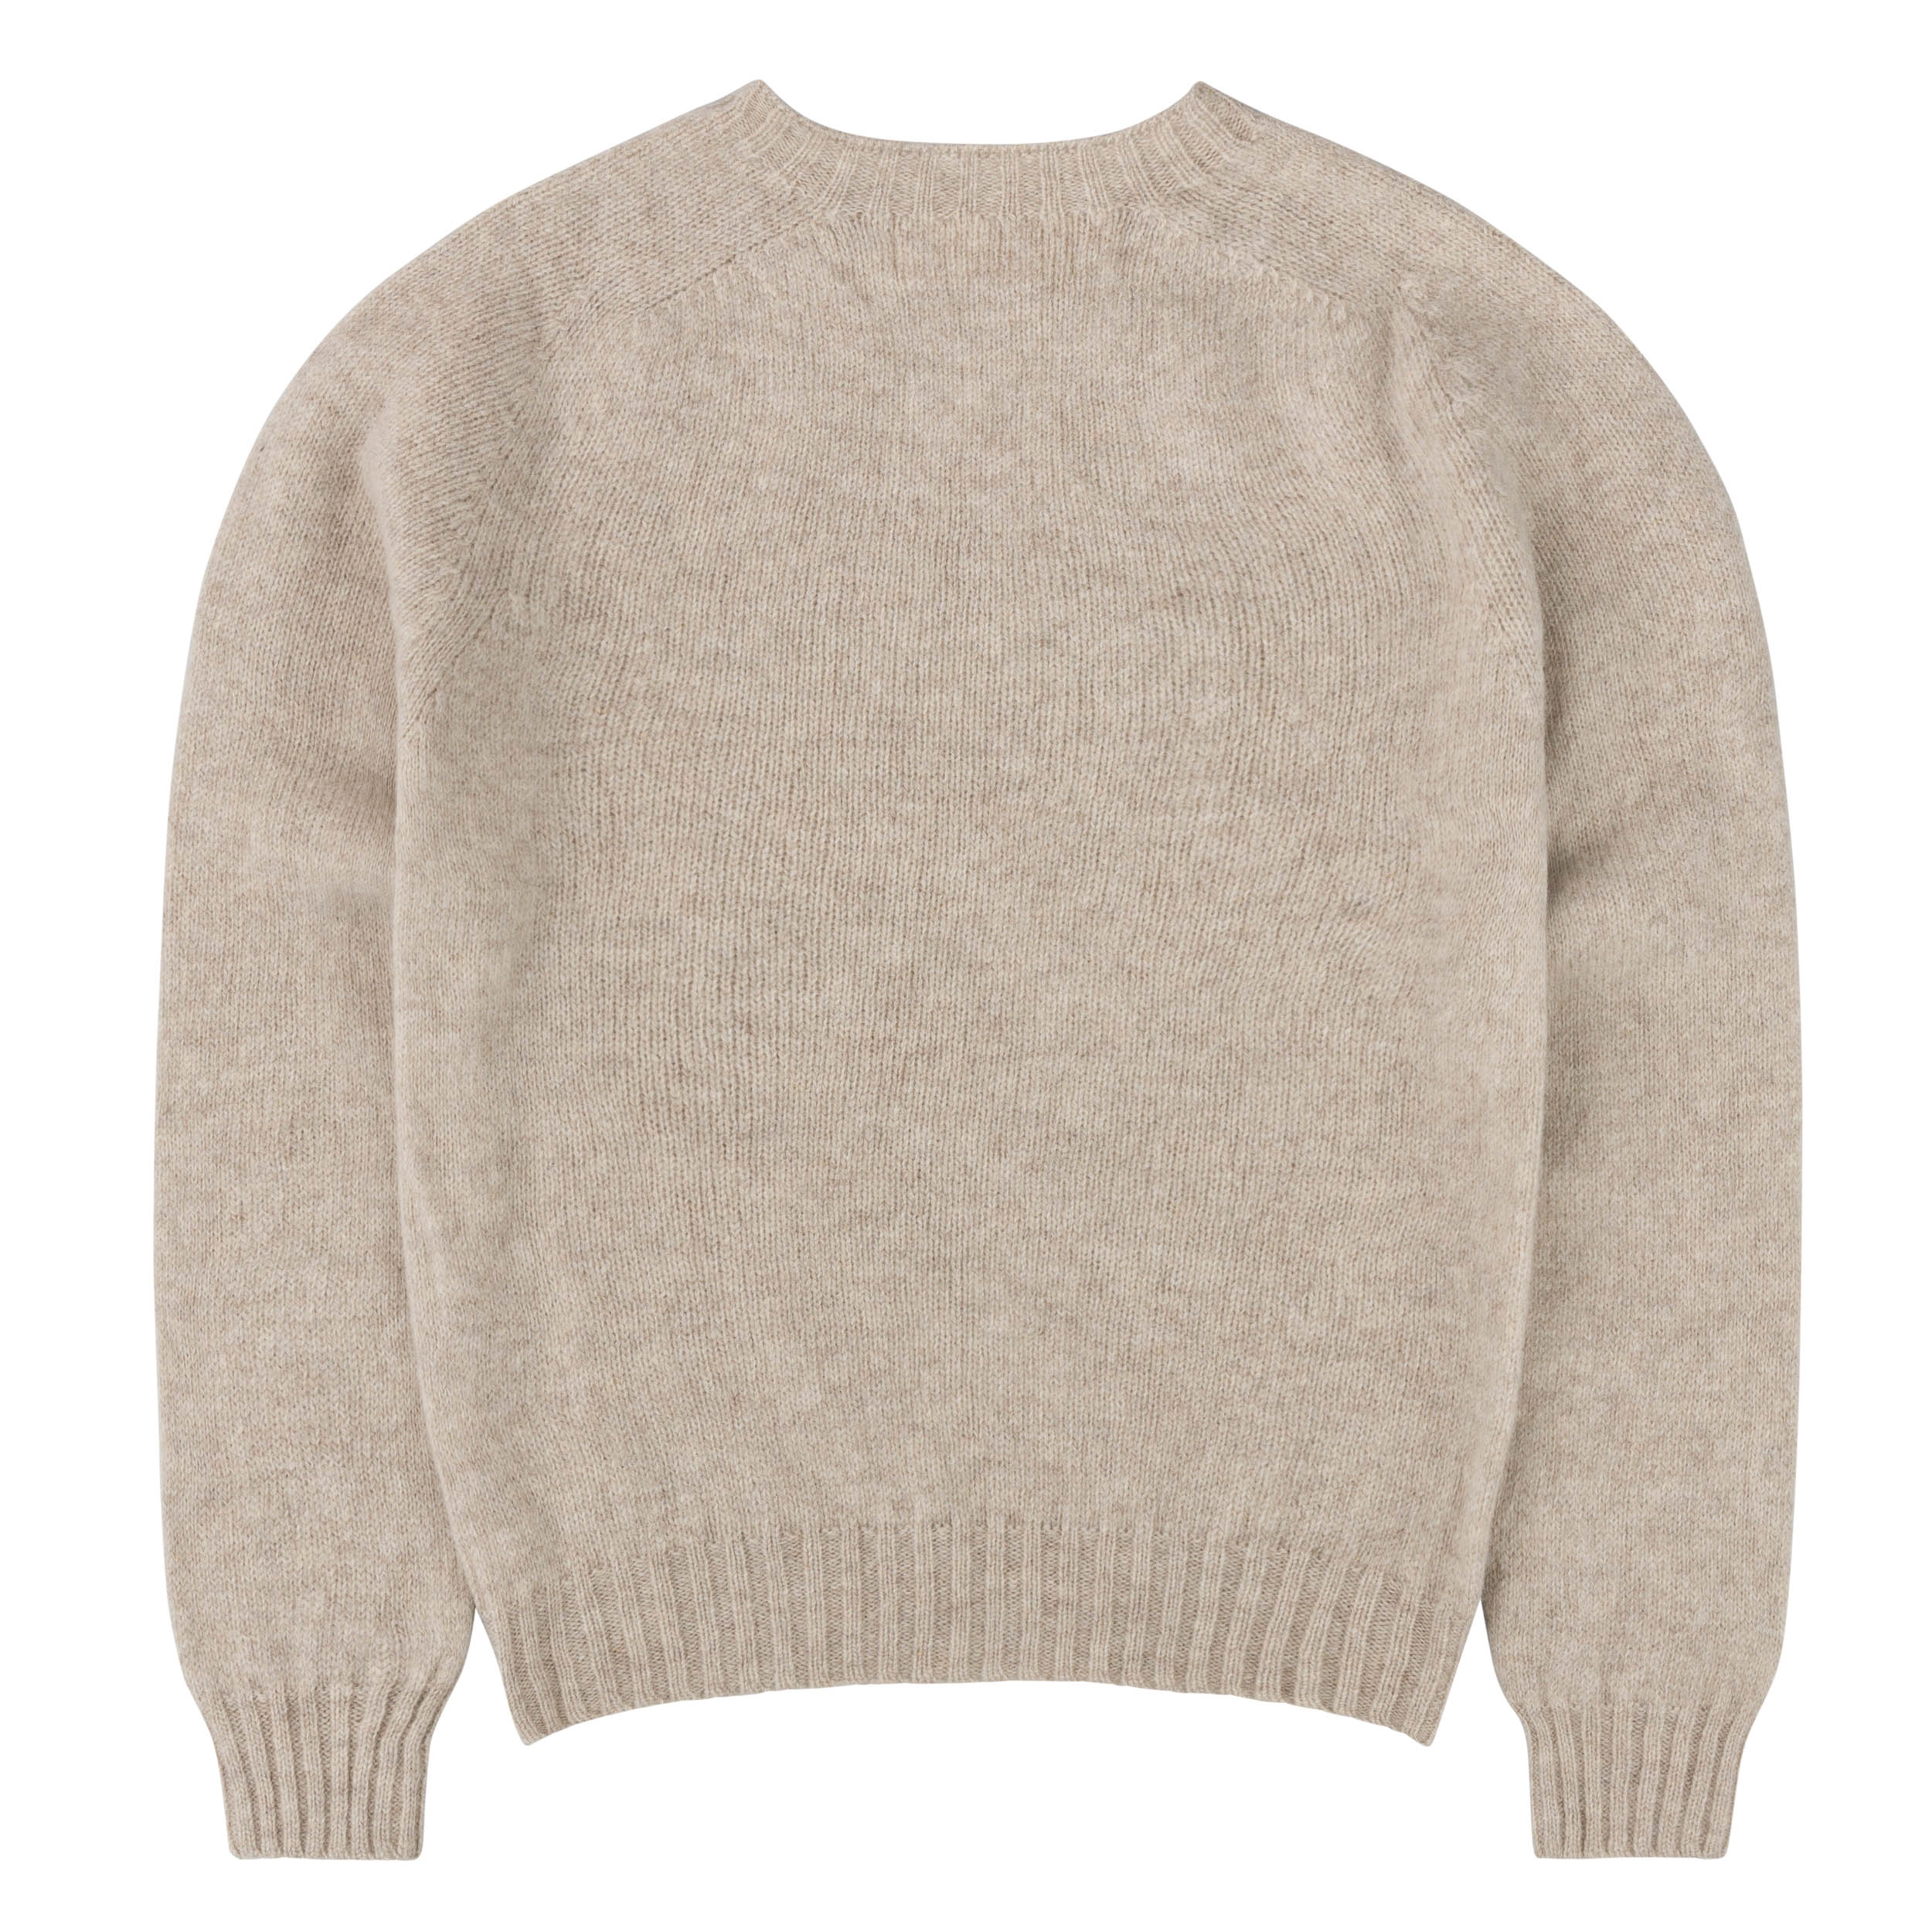 Carrier Company Shetland Lambswool Jumper in Putty